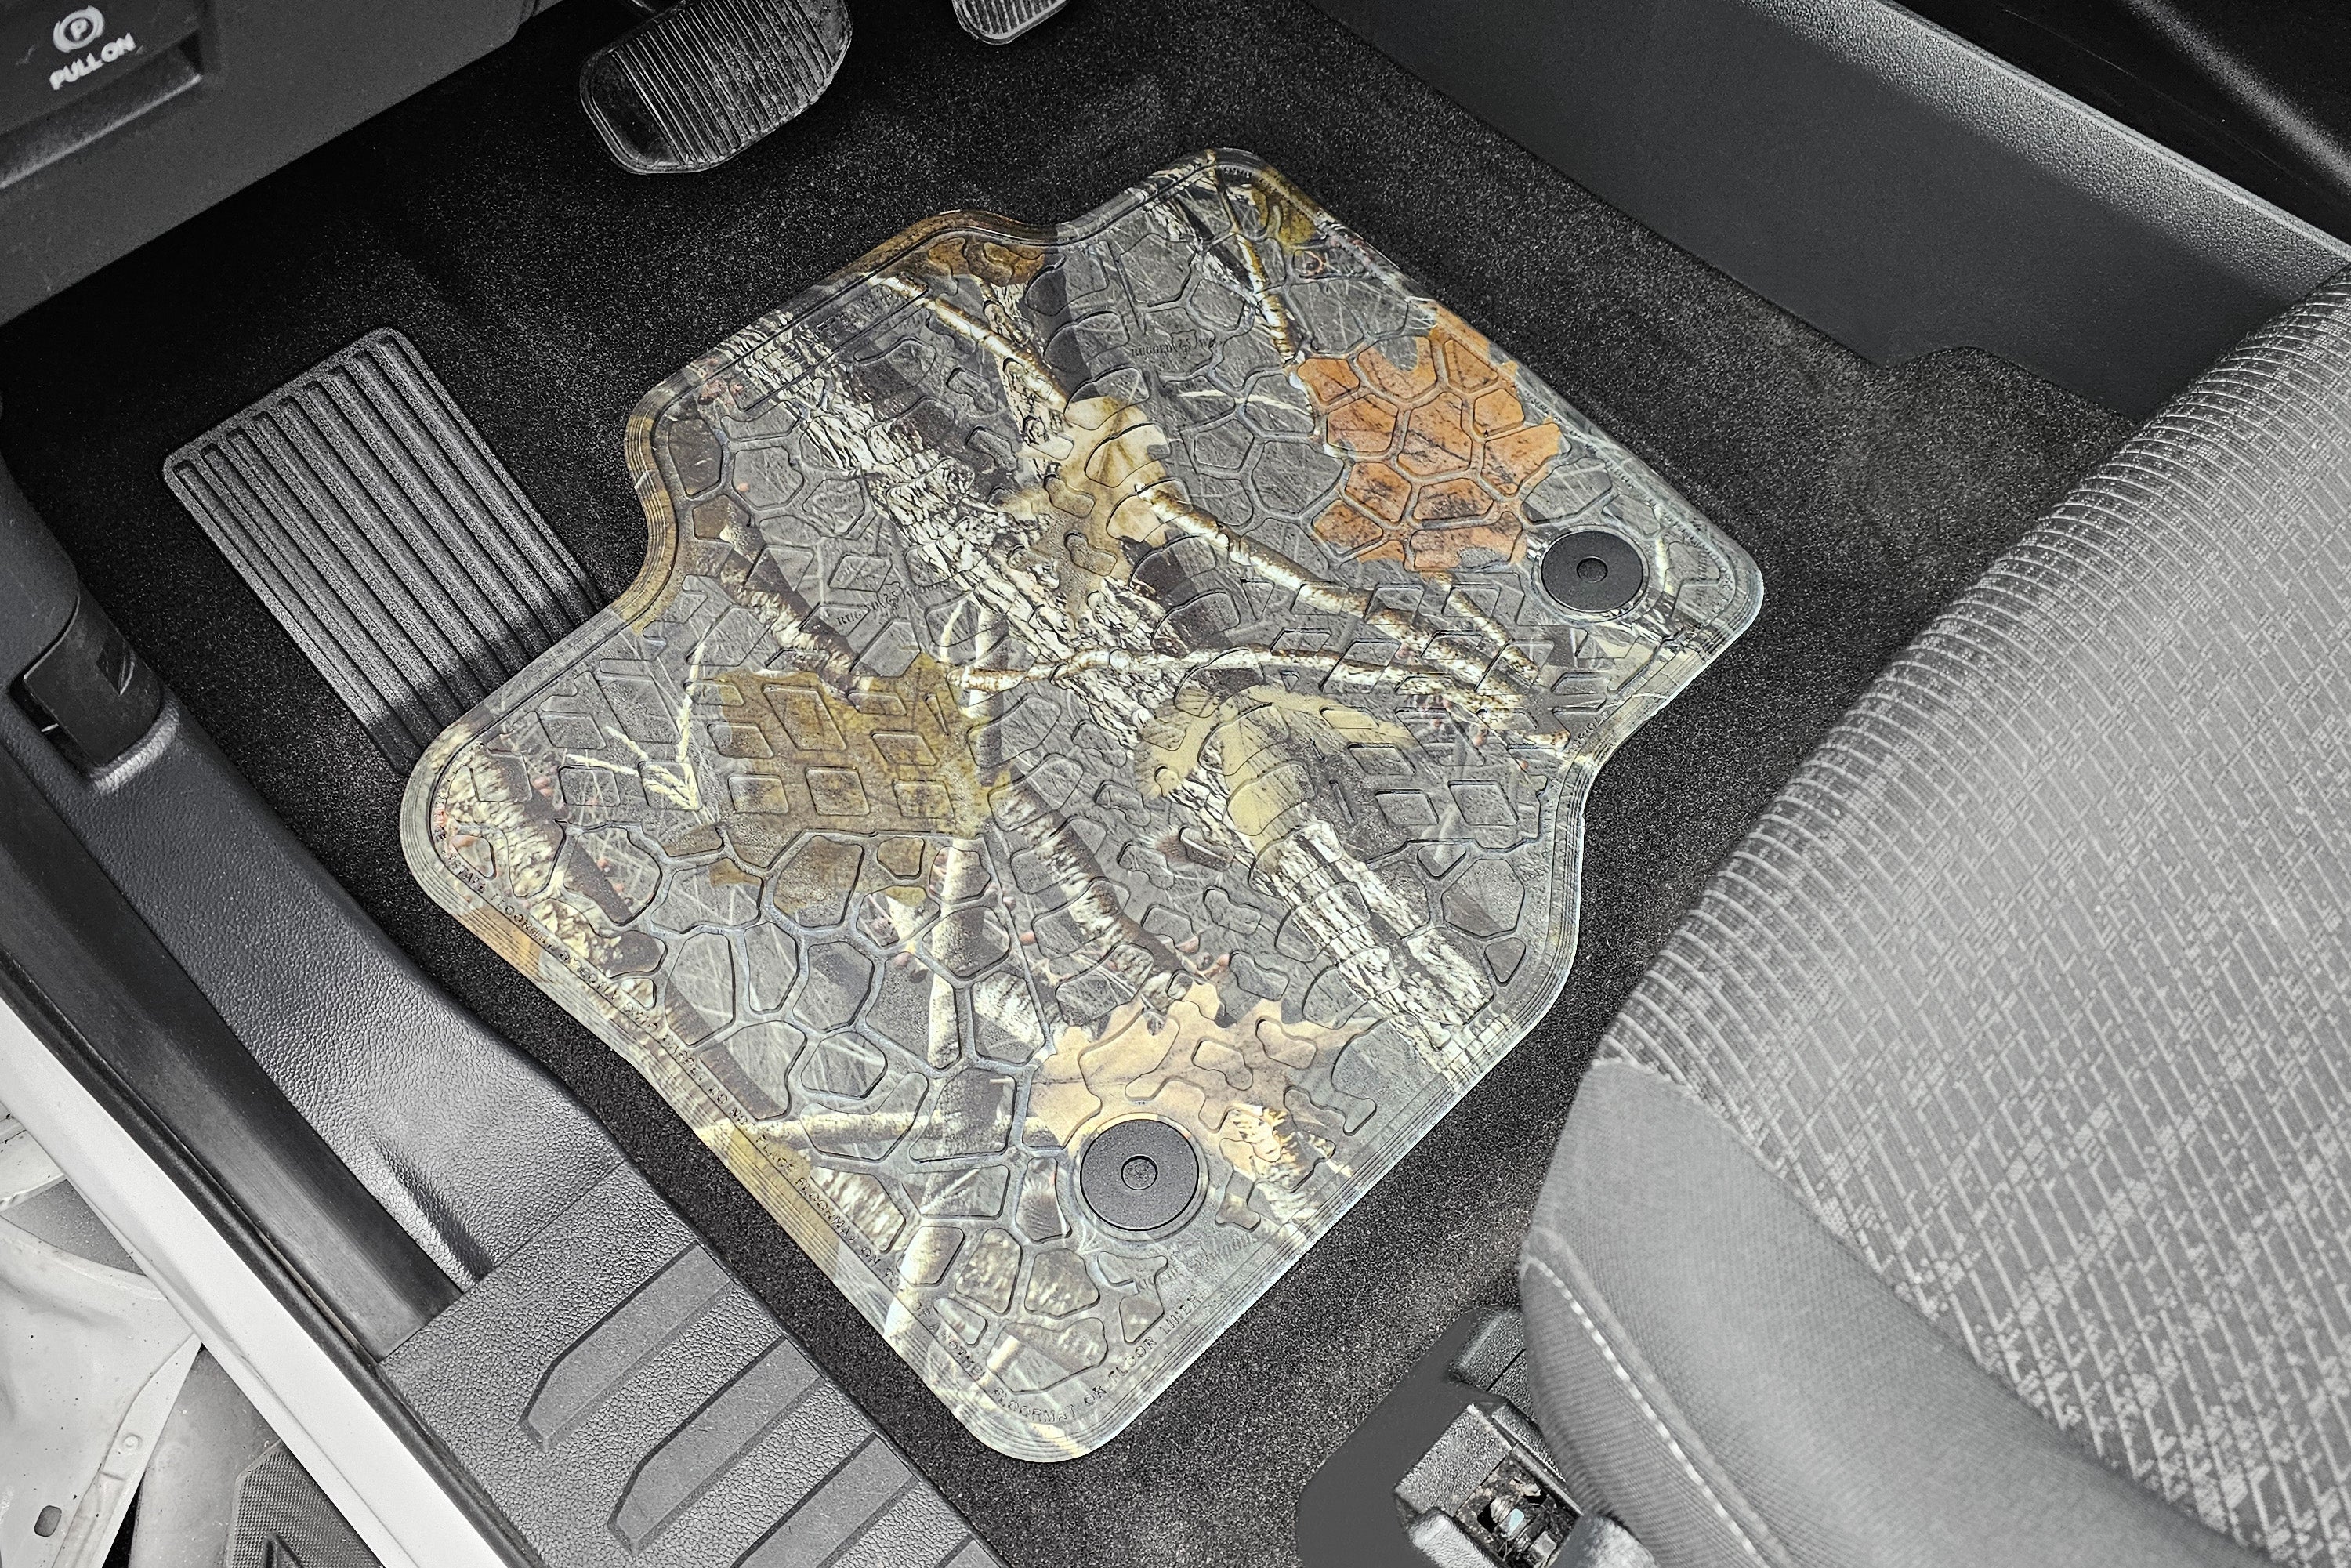 Superduty Floor Mats 15-23 Ford F-150 Super/Crew Cab 4 Piece Tire Tread/Scorched Earth Scene - Rugged Woods FlexTread